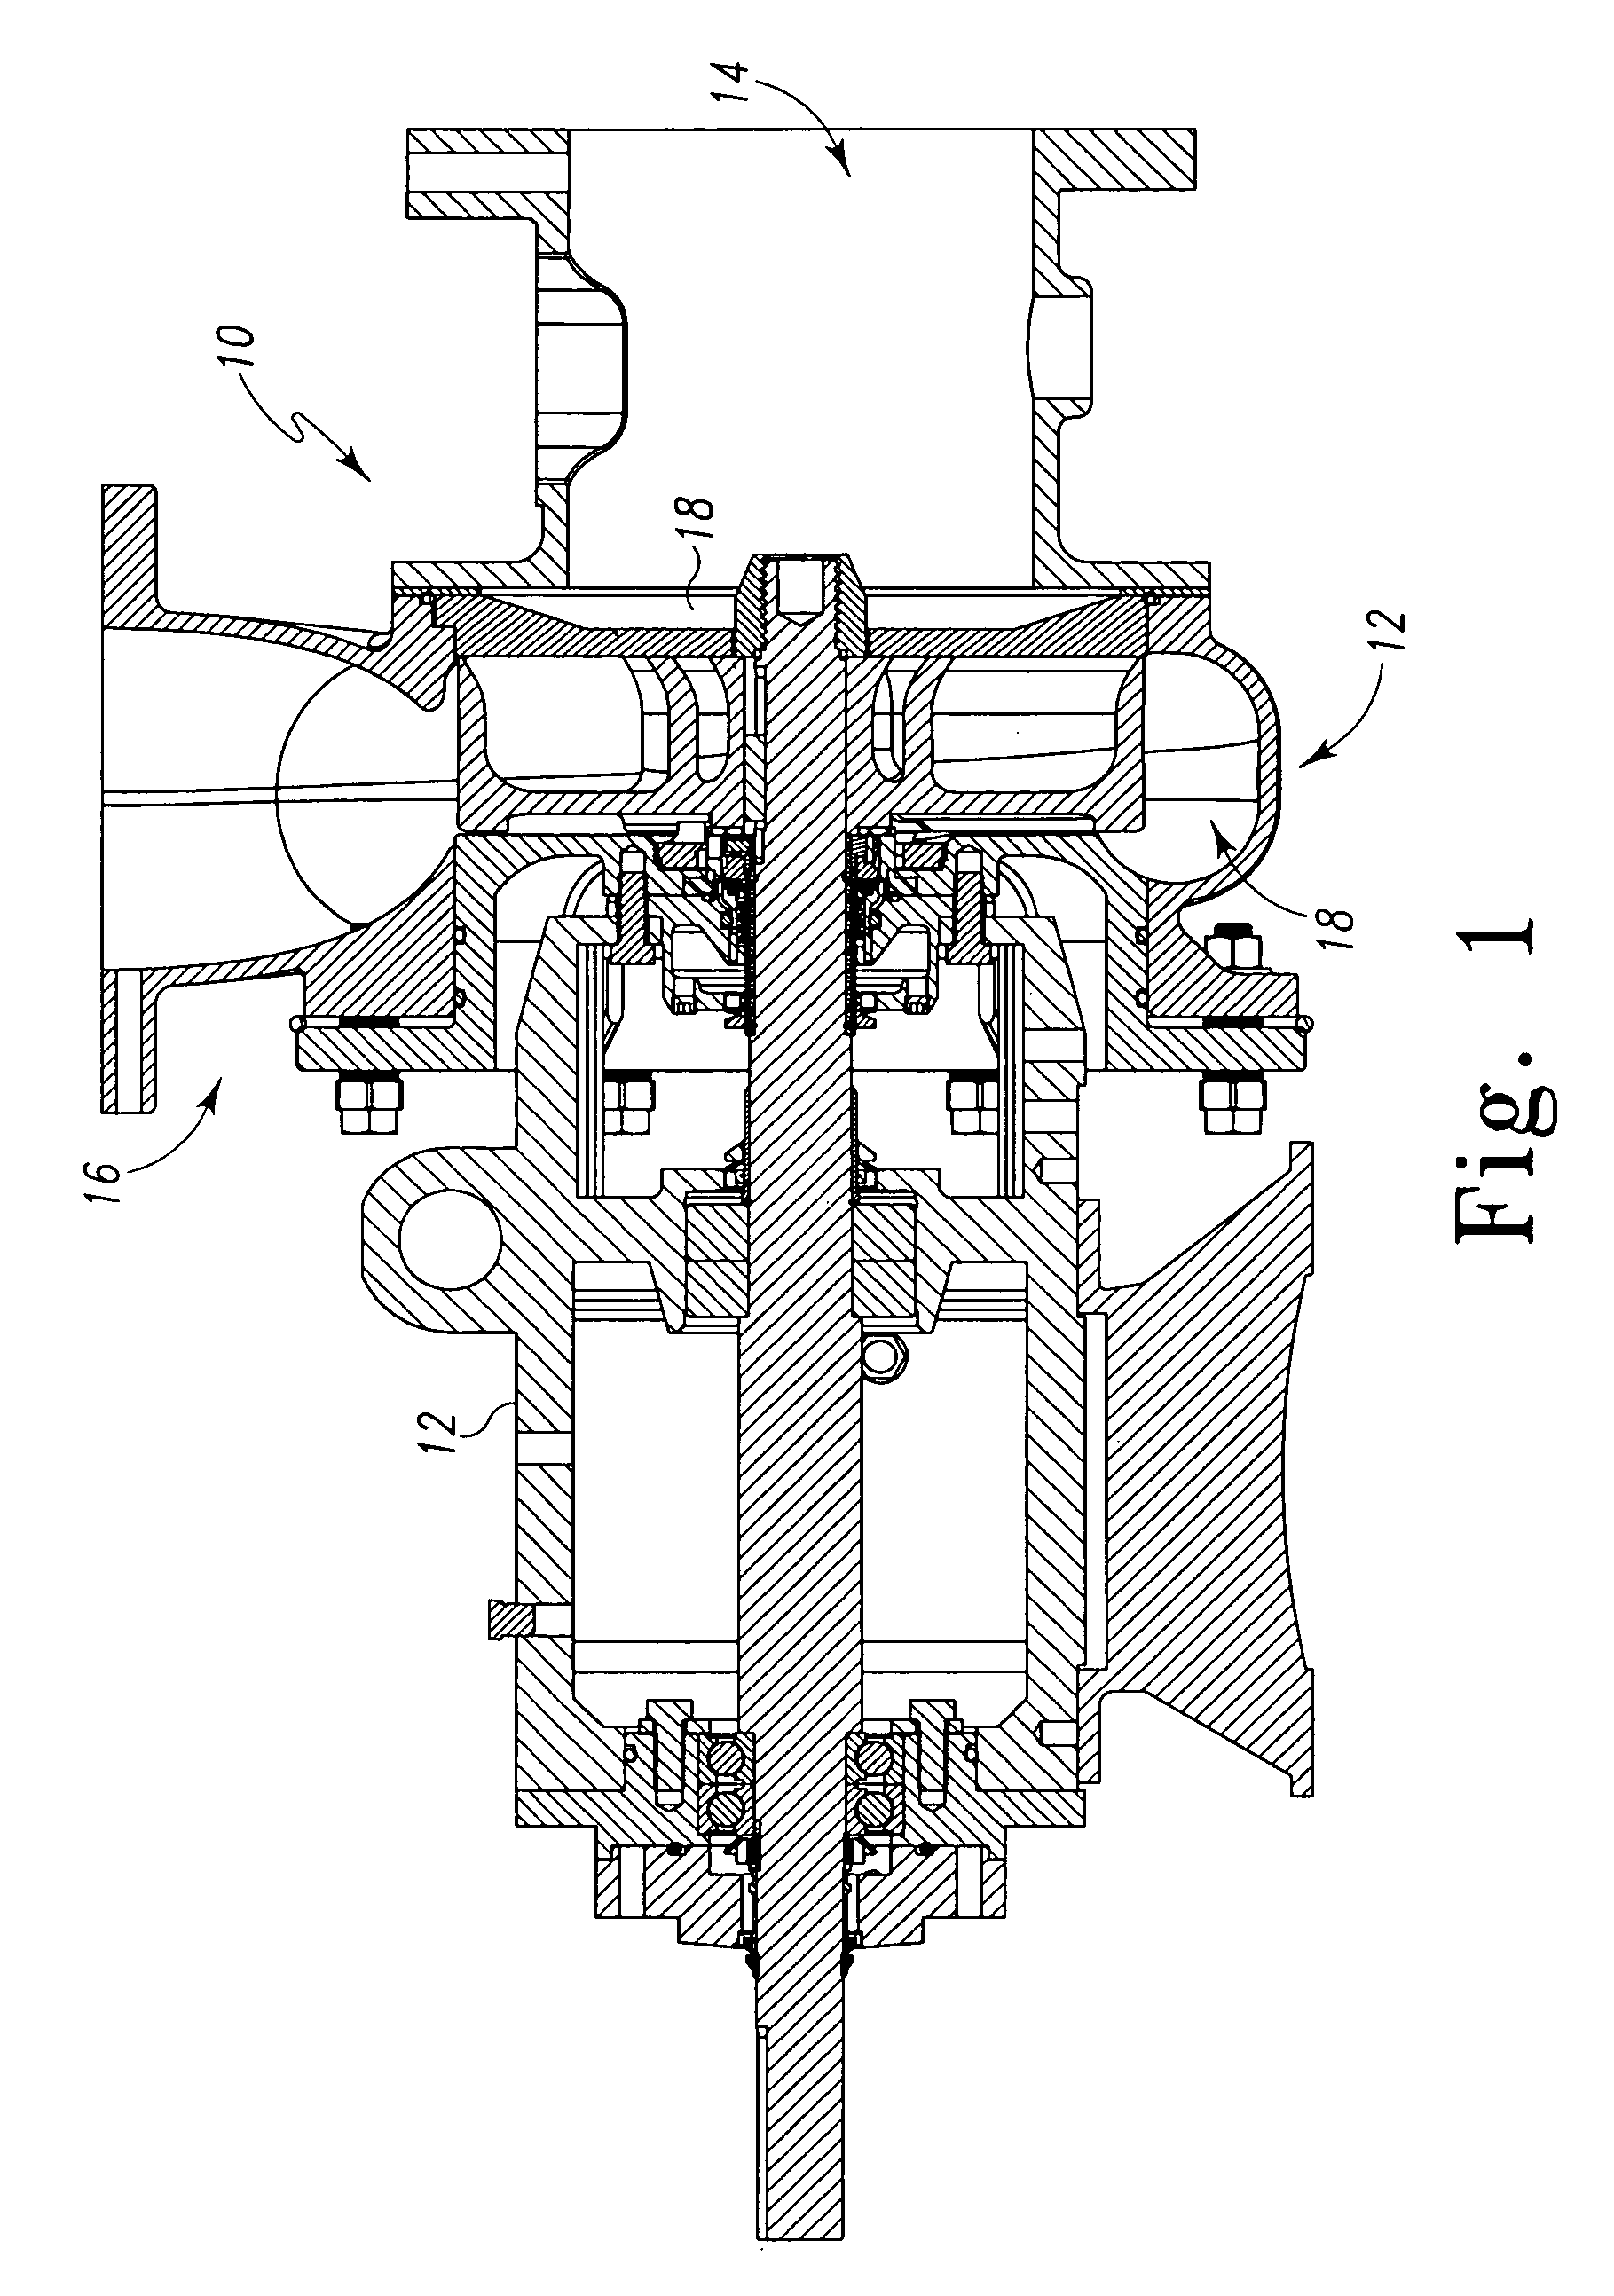 Centrifugal chopper pump with impeller assembly